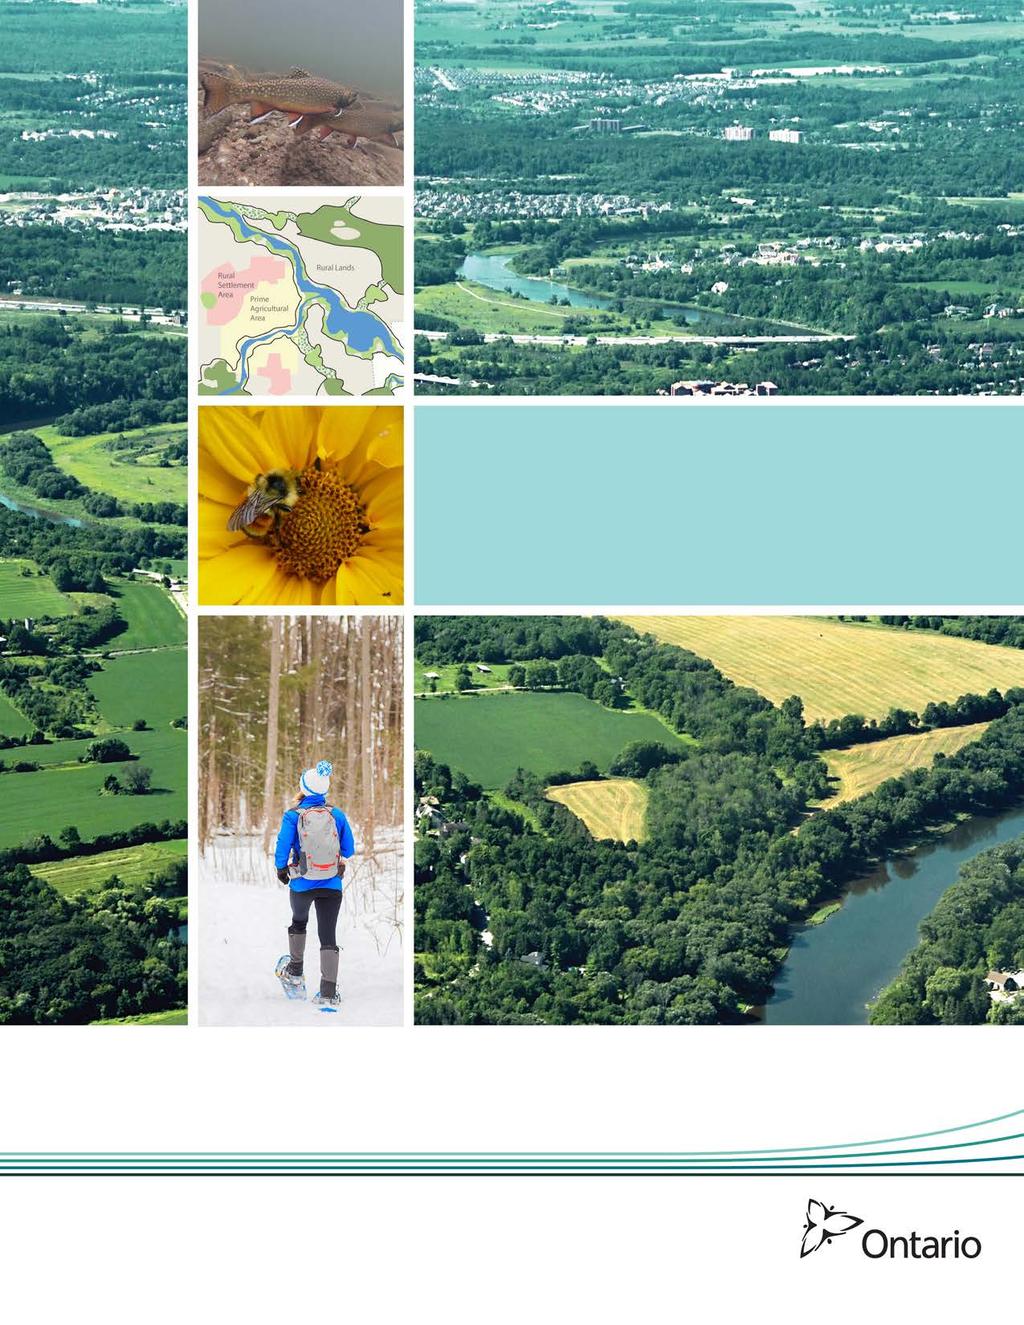 THE REGIONAL NATURAL HERITAGE SYSTEM FOR THE GROWTH PLAN FOR